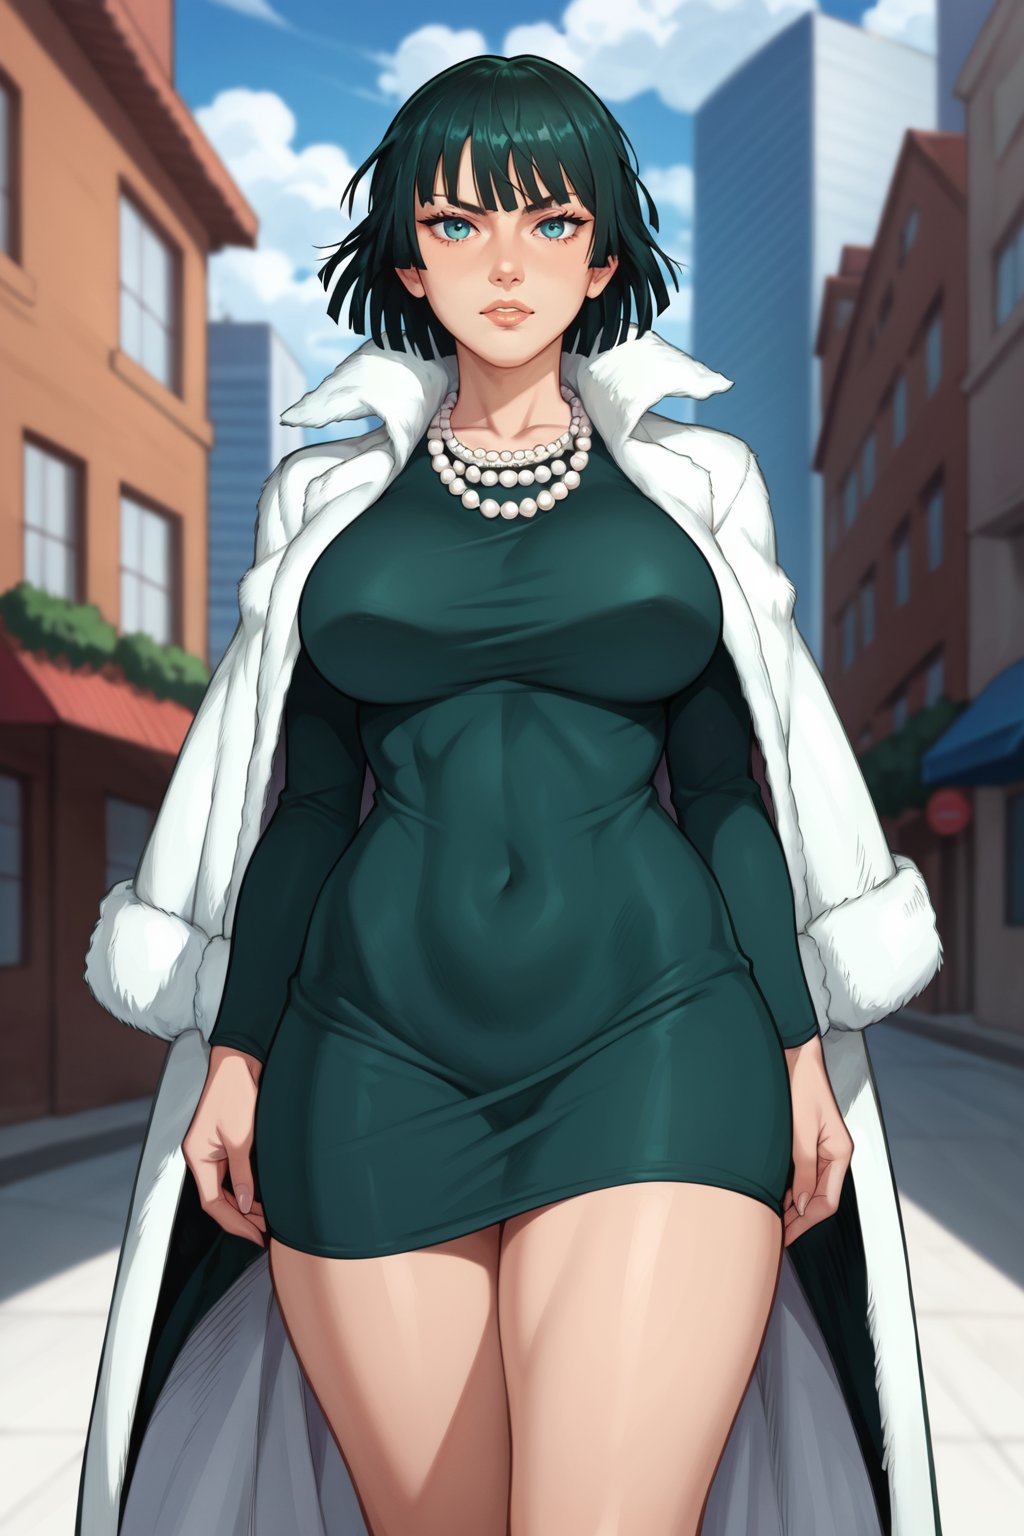 score_9, score_8_up, (detailed eyes: 1.2),((curvy body, hourglass body)),Fubuki, young woman, curvy figure, chin-length, dark green hair, light green eyes. white fur coat, dark green dress, ajusted dress, form-fitting V-neck dress with a high collar, thigh-high black boots, white pearl necklaces, solo, eyelashes, outdoors,big breasts, thighs, angry expresion, looking at viewer, curvy, standing, full bodyshot, city background, Fubuki_(One-Punch_Man)